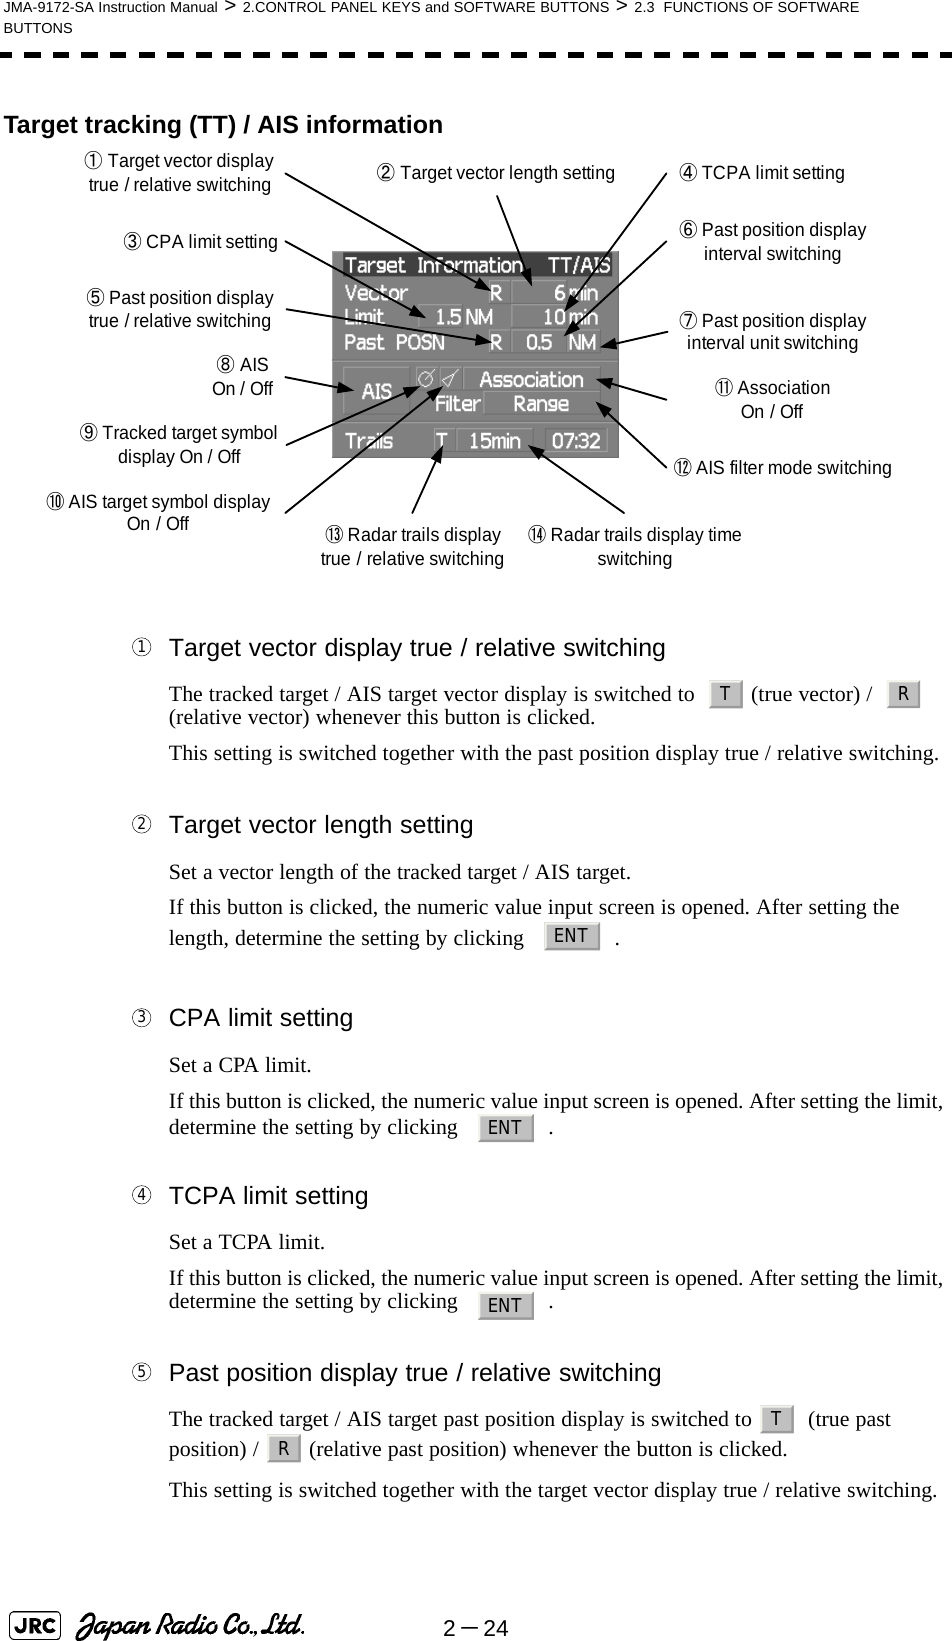 2－24JMA-9172-SA Instruction Manual &gt; 2.CONTROL PANEL KEYS and SOFTWARE BUTTONS &gt; 2.3  FUNCTIONS OF SOFTWARE BUTTONSTarget tracking (TT) / AIS information Target vector display true / relative switchingThe tracked target / AIS target vector display is switched to    (true vector) /    (relative vector) whenever this button is clicked.This setting is switched together with the past position display true / relative switching. Target vector length settingSet a vector length of the tracked target / AIS target.If this button is clicked, the numeric value input screen is opened. After setting the length, determine the setting by clicking    . CPA limit settingSet a CPA limit.If this button is clicked, the numeric value input screen is opened. After setting the limit, determine the setting by clicking    . TCPA limit settingSet a TCPA limit.If this button is clicked, the numeric value input screen is opened. After setting the limit, determine the setting by clicking    . Past position display true / relative switchingThe tracked target / AIS target past position display is switched to    (true past position) /   (relative past position) whenever the button is clicked.This setting is switched together with the target vector display true / relative switching.⑥Past position displayinterval switching⑪AssociationOn / Off⑭Radar trails display time switching⑬Radar trails display true / relative switching①Target vector display true / relative switching ②Target vector length setting⑤Past position display true / relative switching ⑦Past position displayinterval unit switching④TCPA limit setting③CPA limit setting⑧AISOn / Off⑩AIS target symbol display On / Off⑨Tracked target symbol display On / Off ⑫AIS filter mode switching1TR2ENT3ENT4ENT5TR